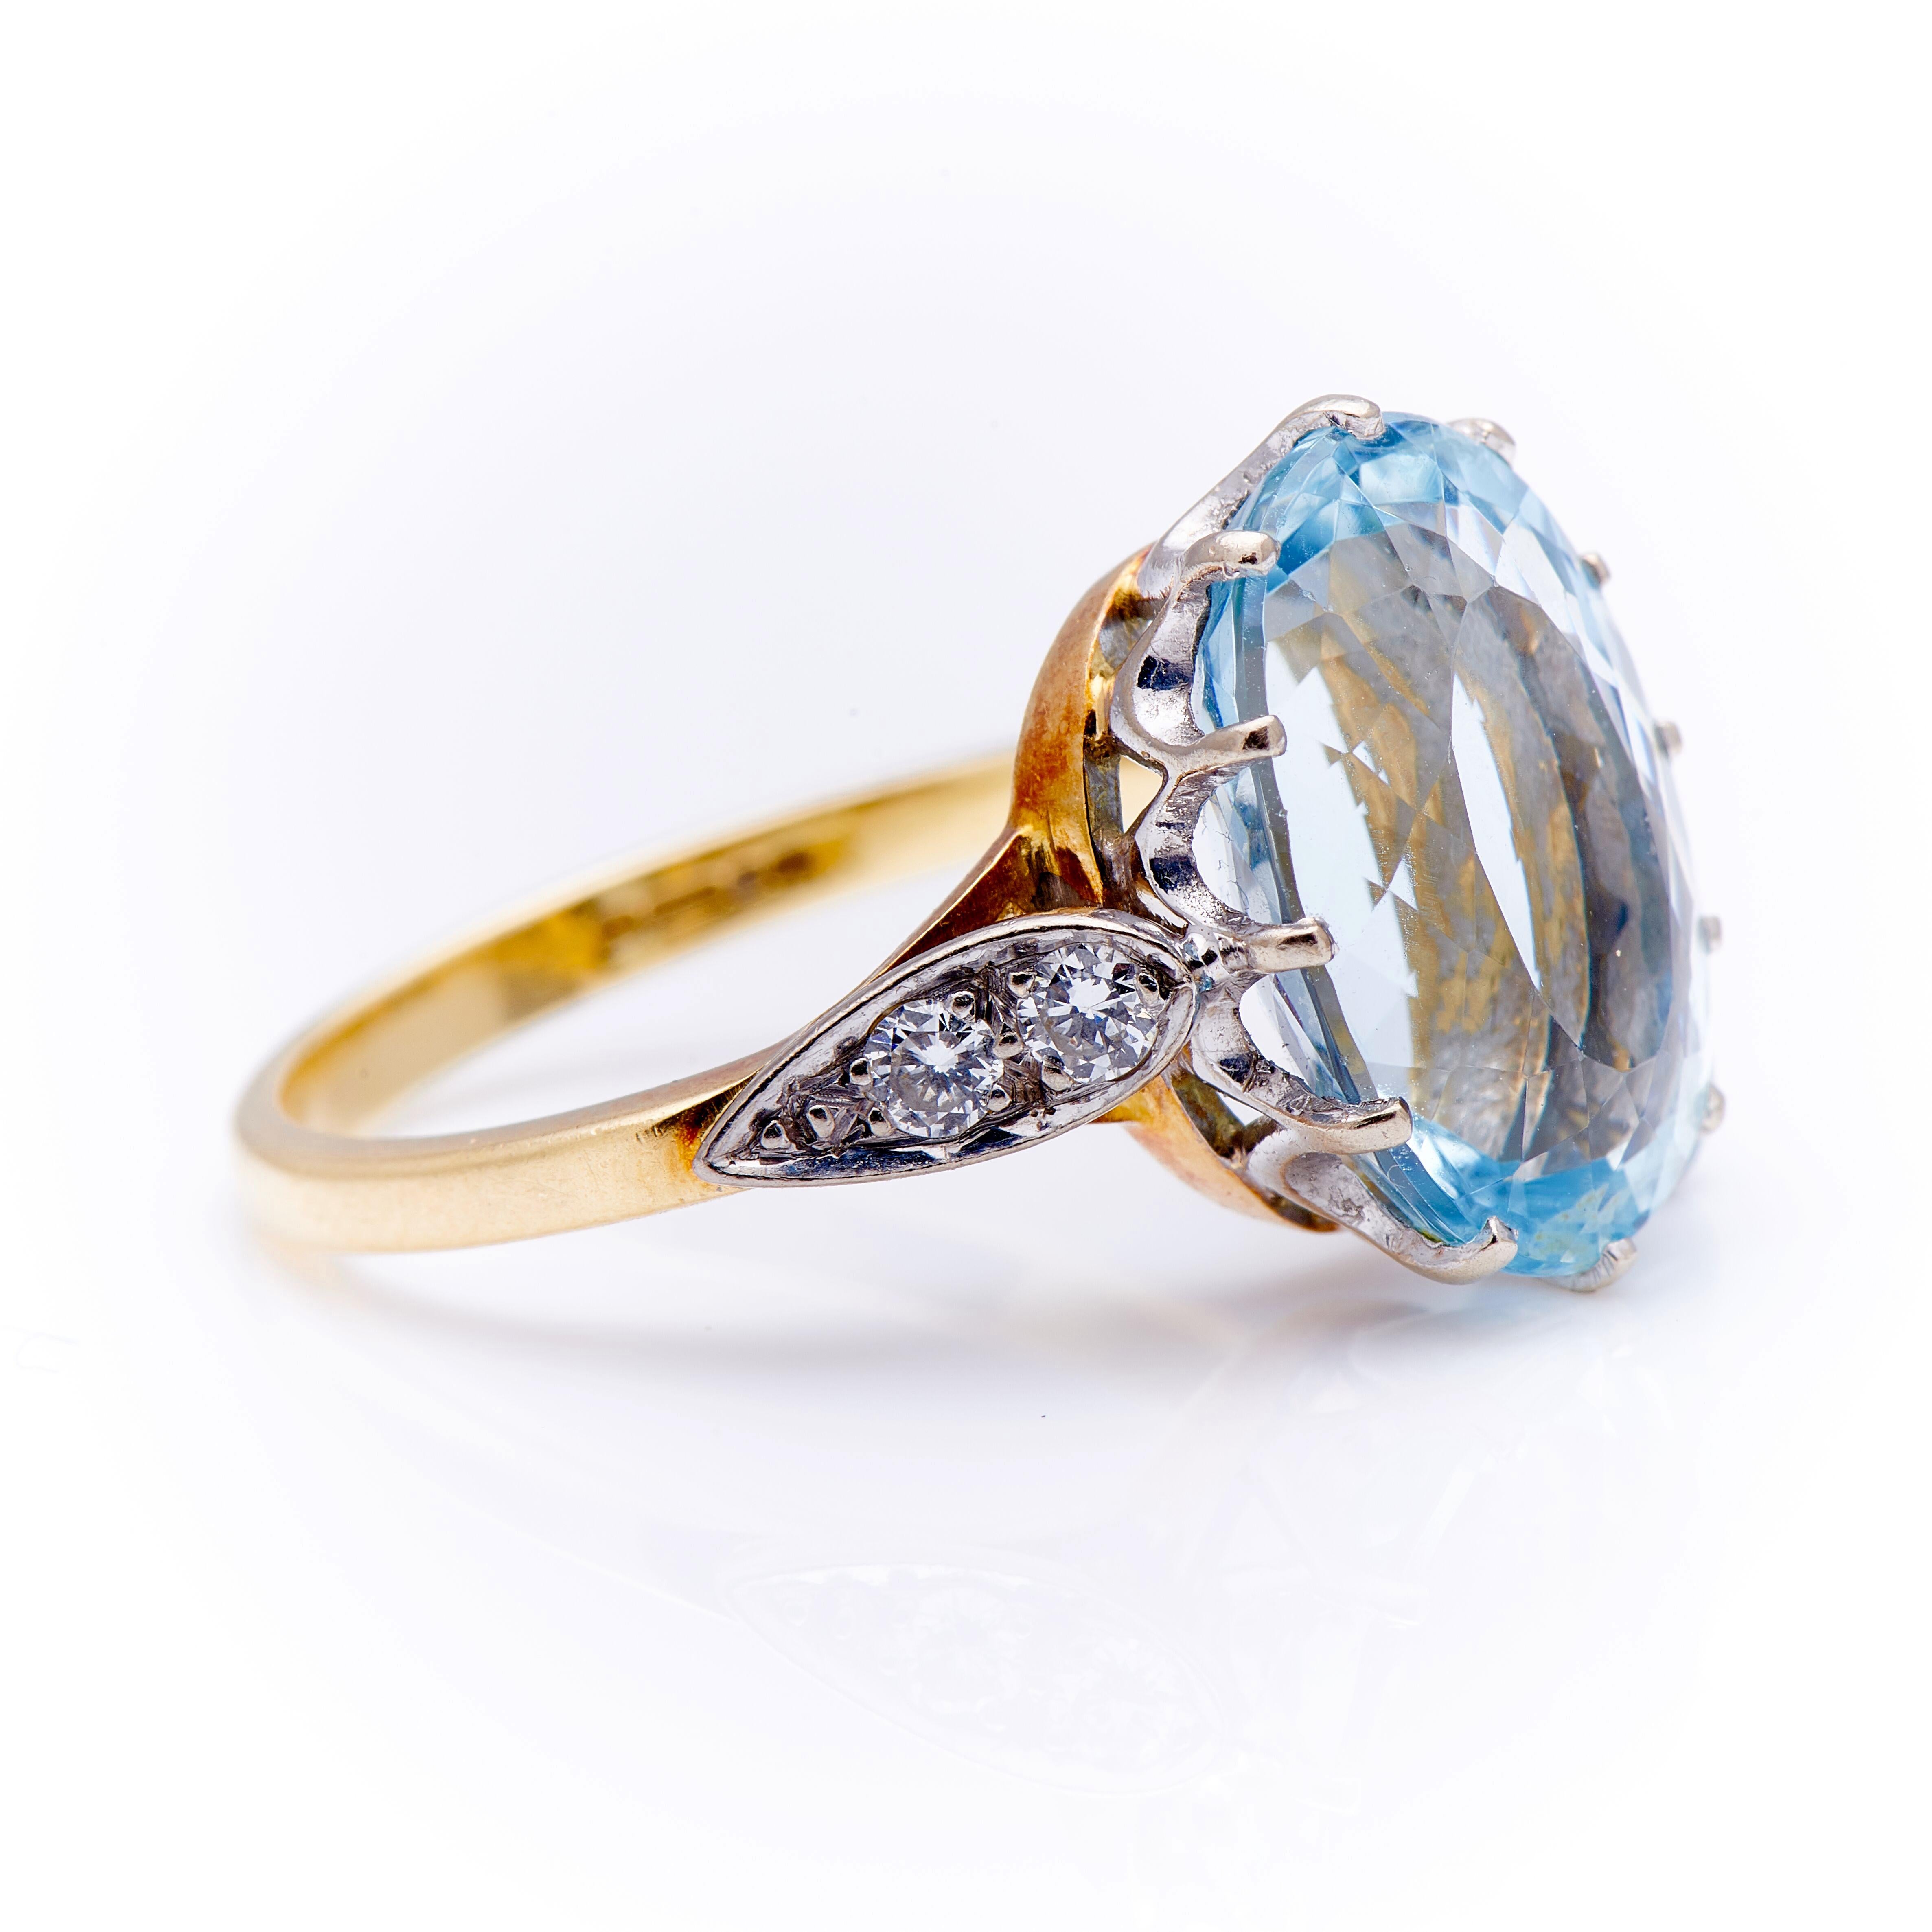 Aquamarine and diamond ring, circa 1950. Claw-set with an oval aquamarine weighing approximately 6 carats, the shoulders of teardrop design set with brilliant-cut diamonds. Aquamarine is a pale blue variety of beryl, the family of stones that